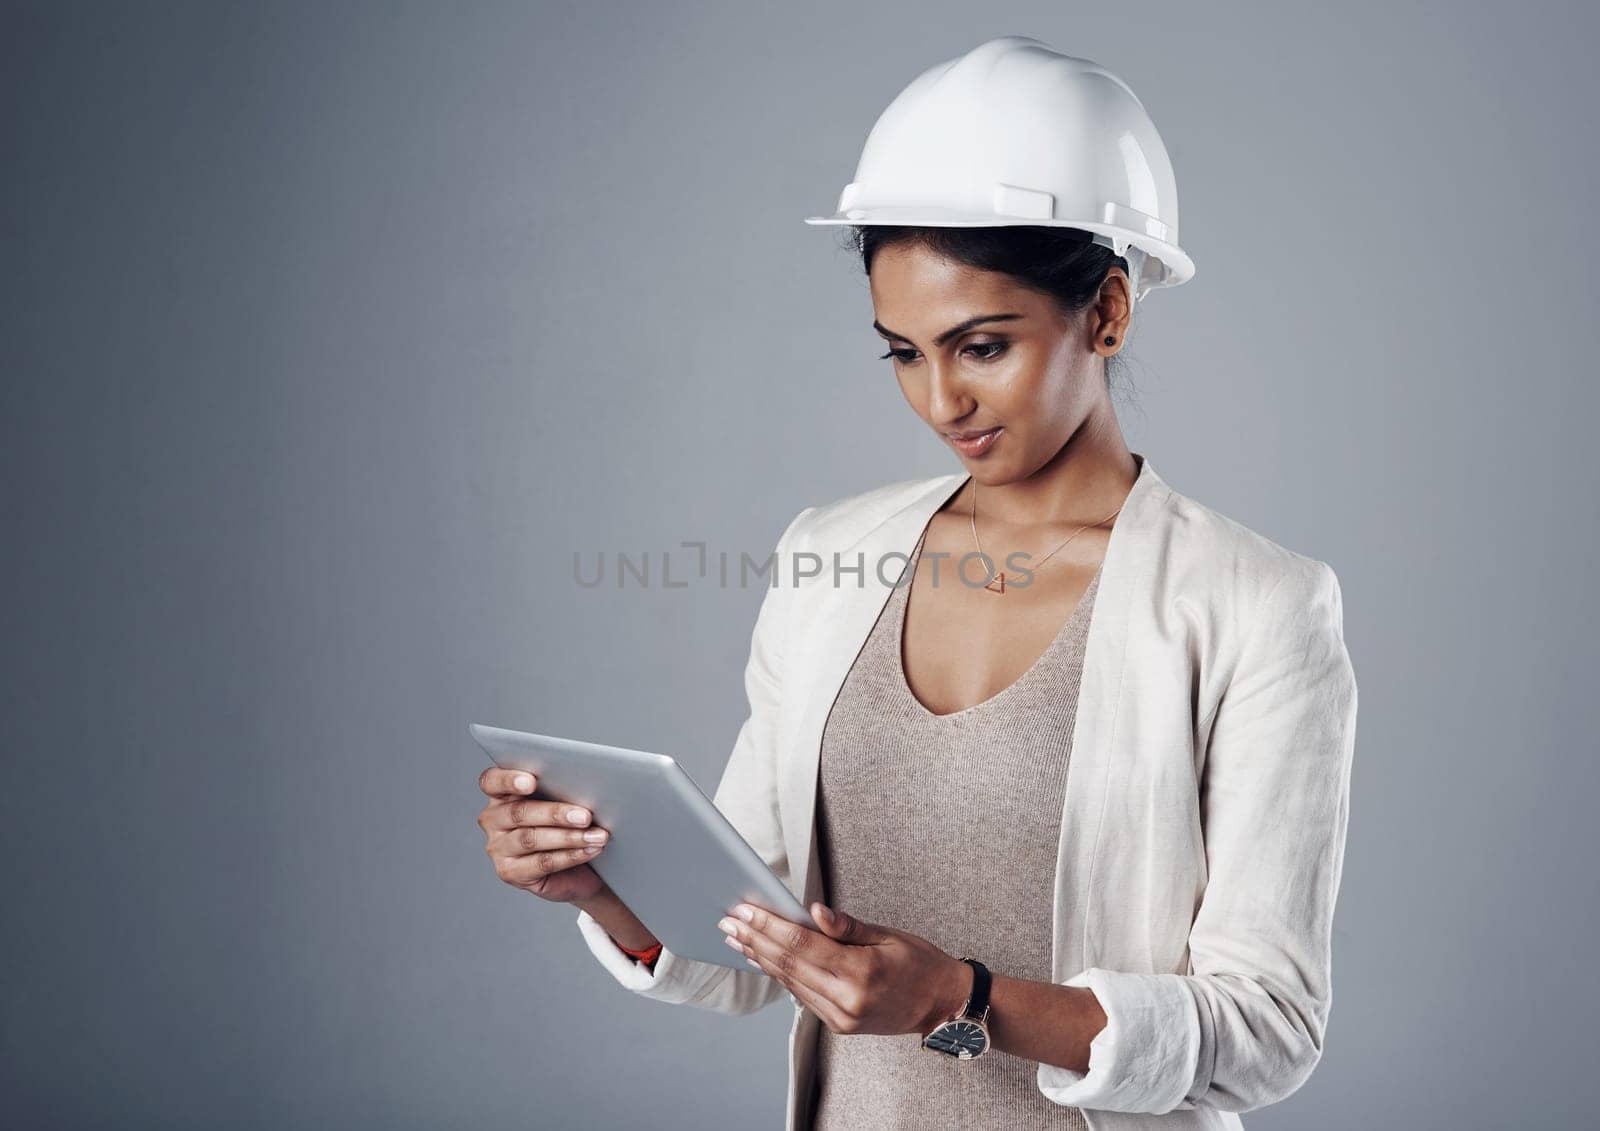 She believes in well-laid plans. a well-dressed civil engineer using her tablet while standing in the studio